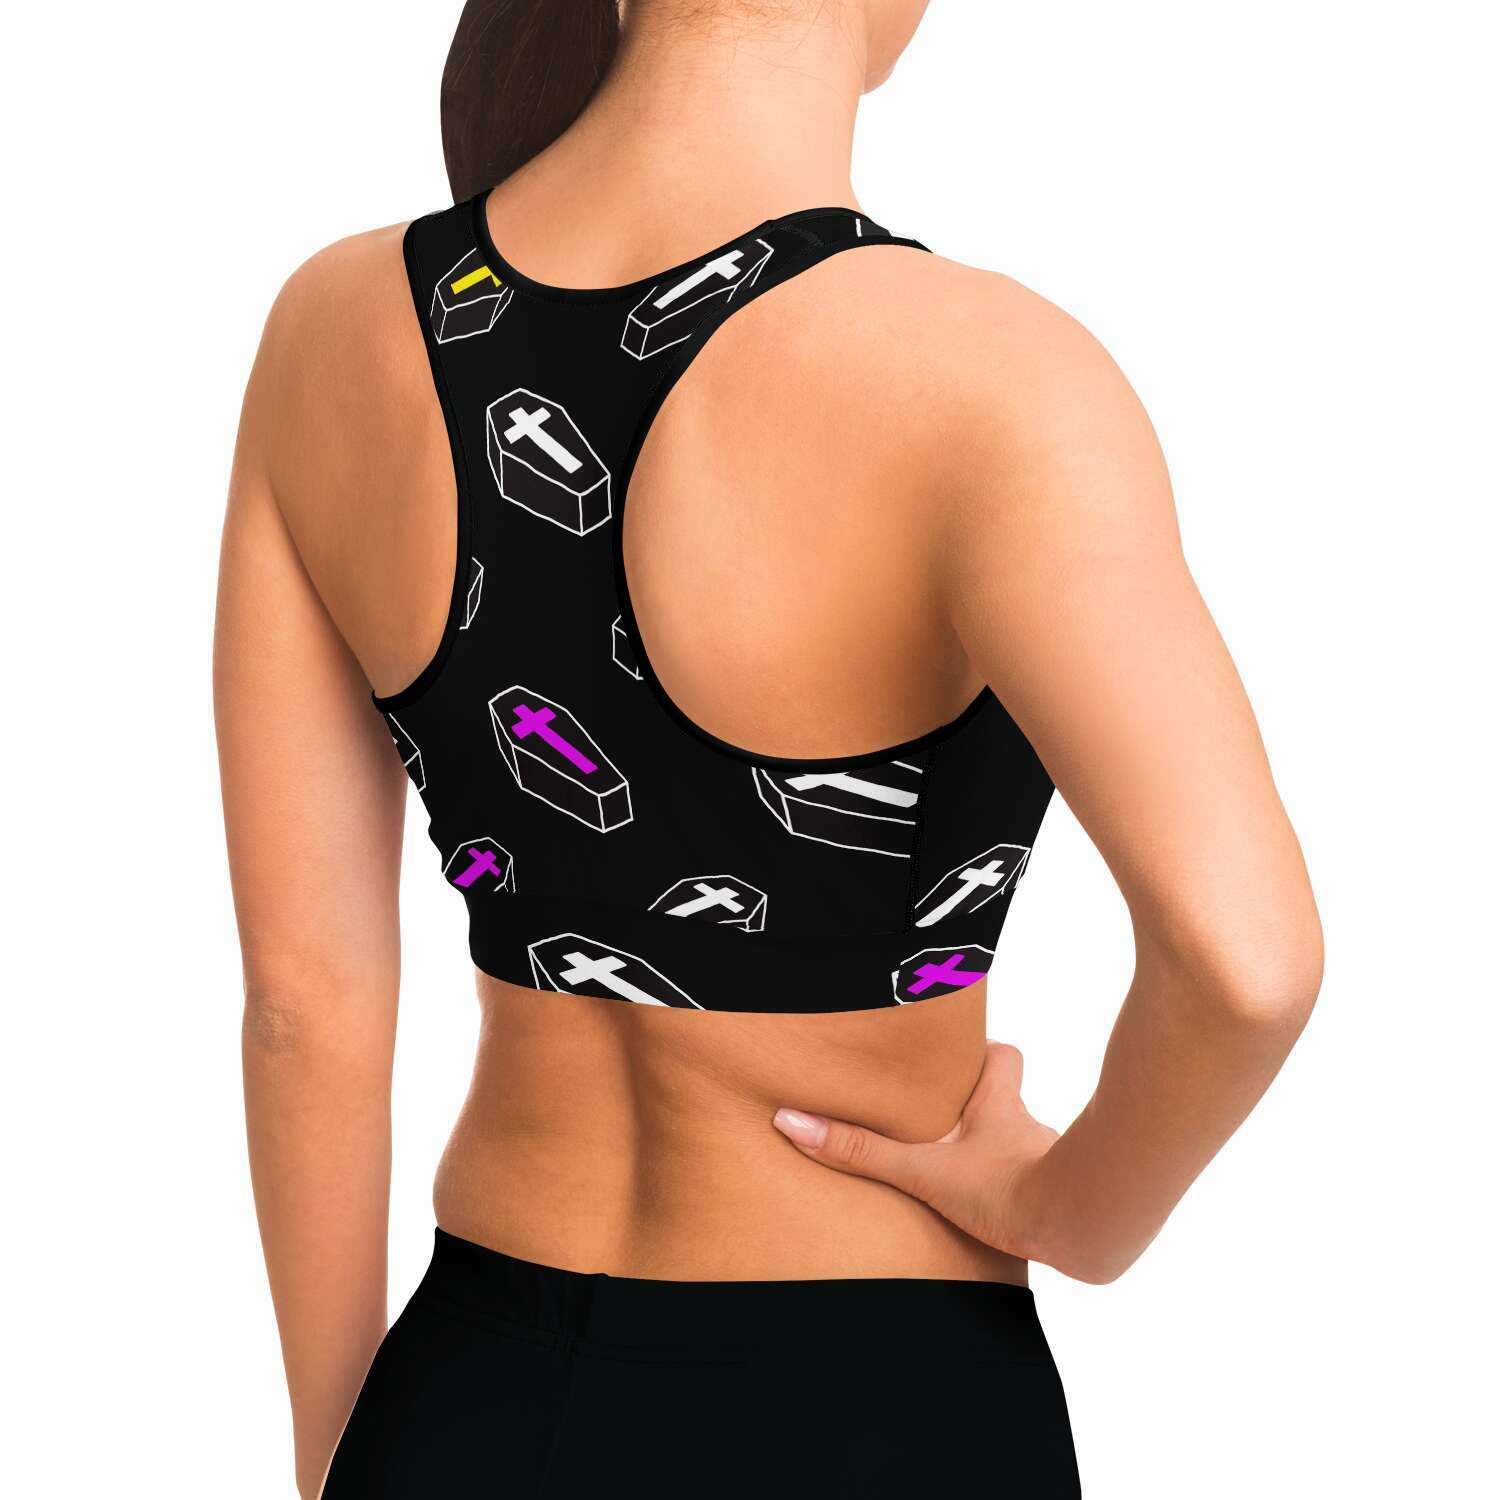 Women's Neon Gothic Crosses Coffins & Covens Athletic Sports Bra Model Right